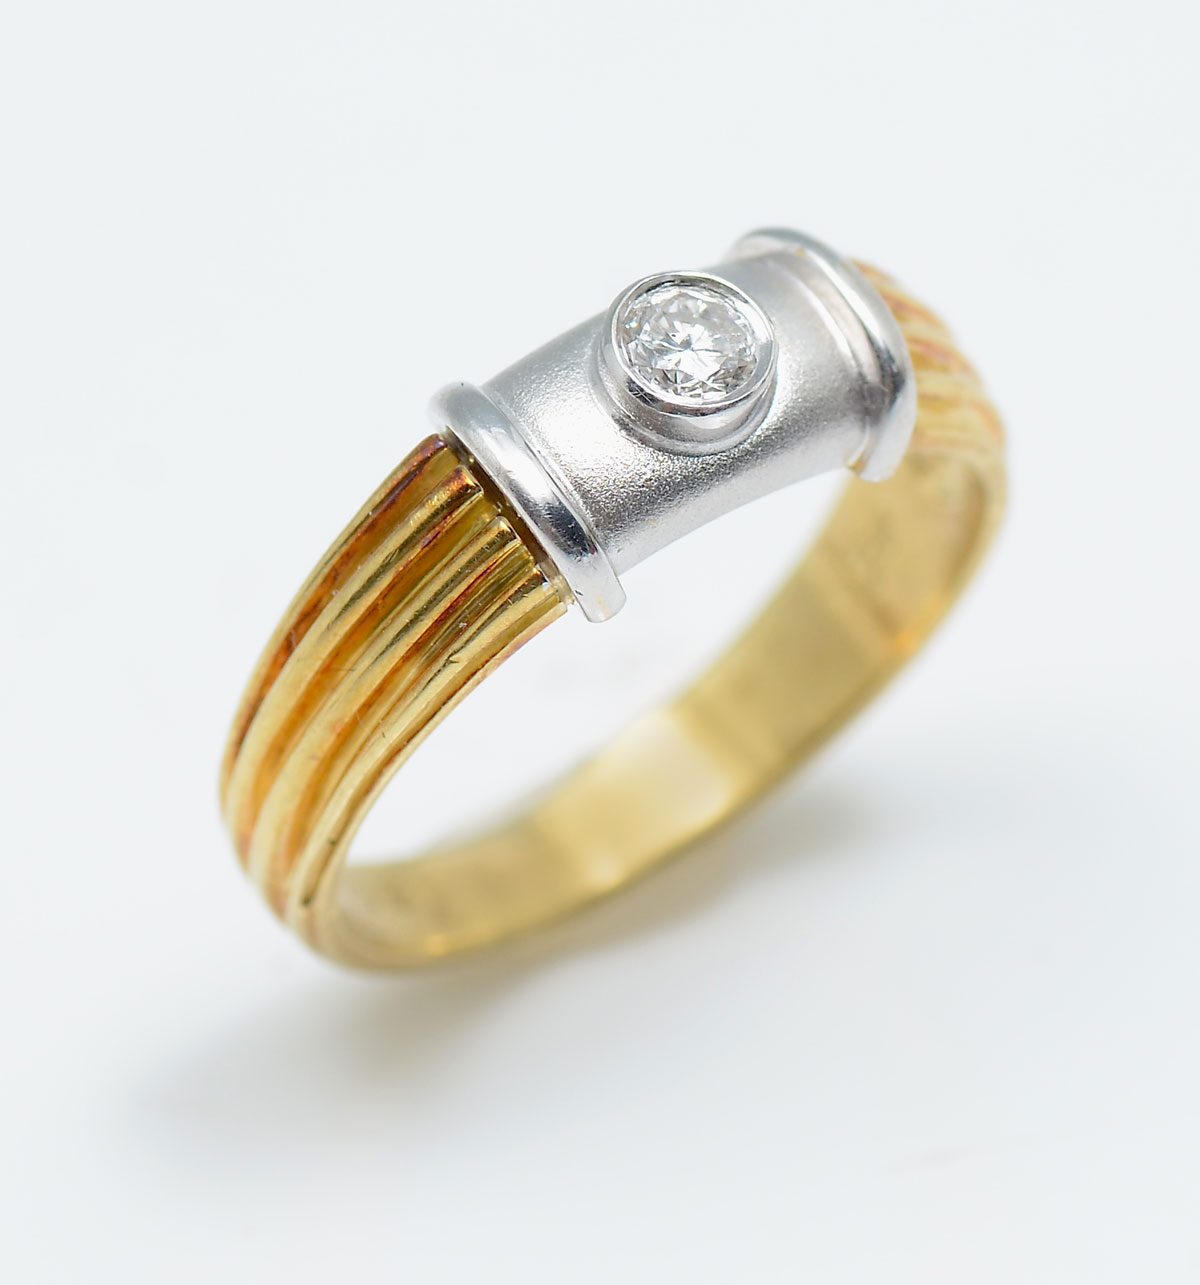 2 TONE 18K FLUTED RING WITH BEZEL